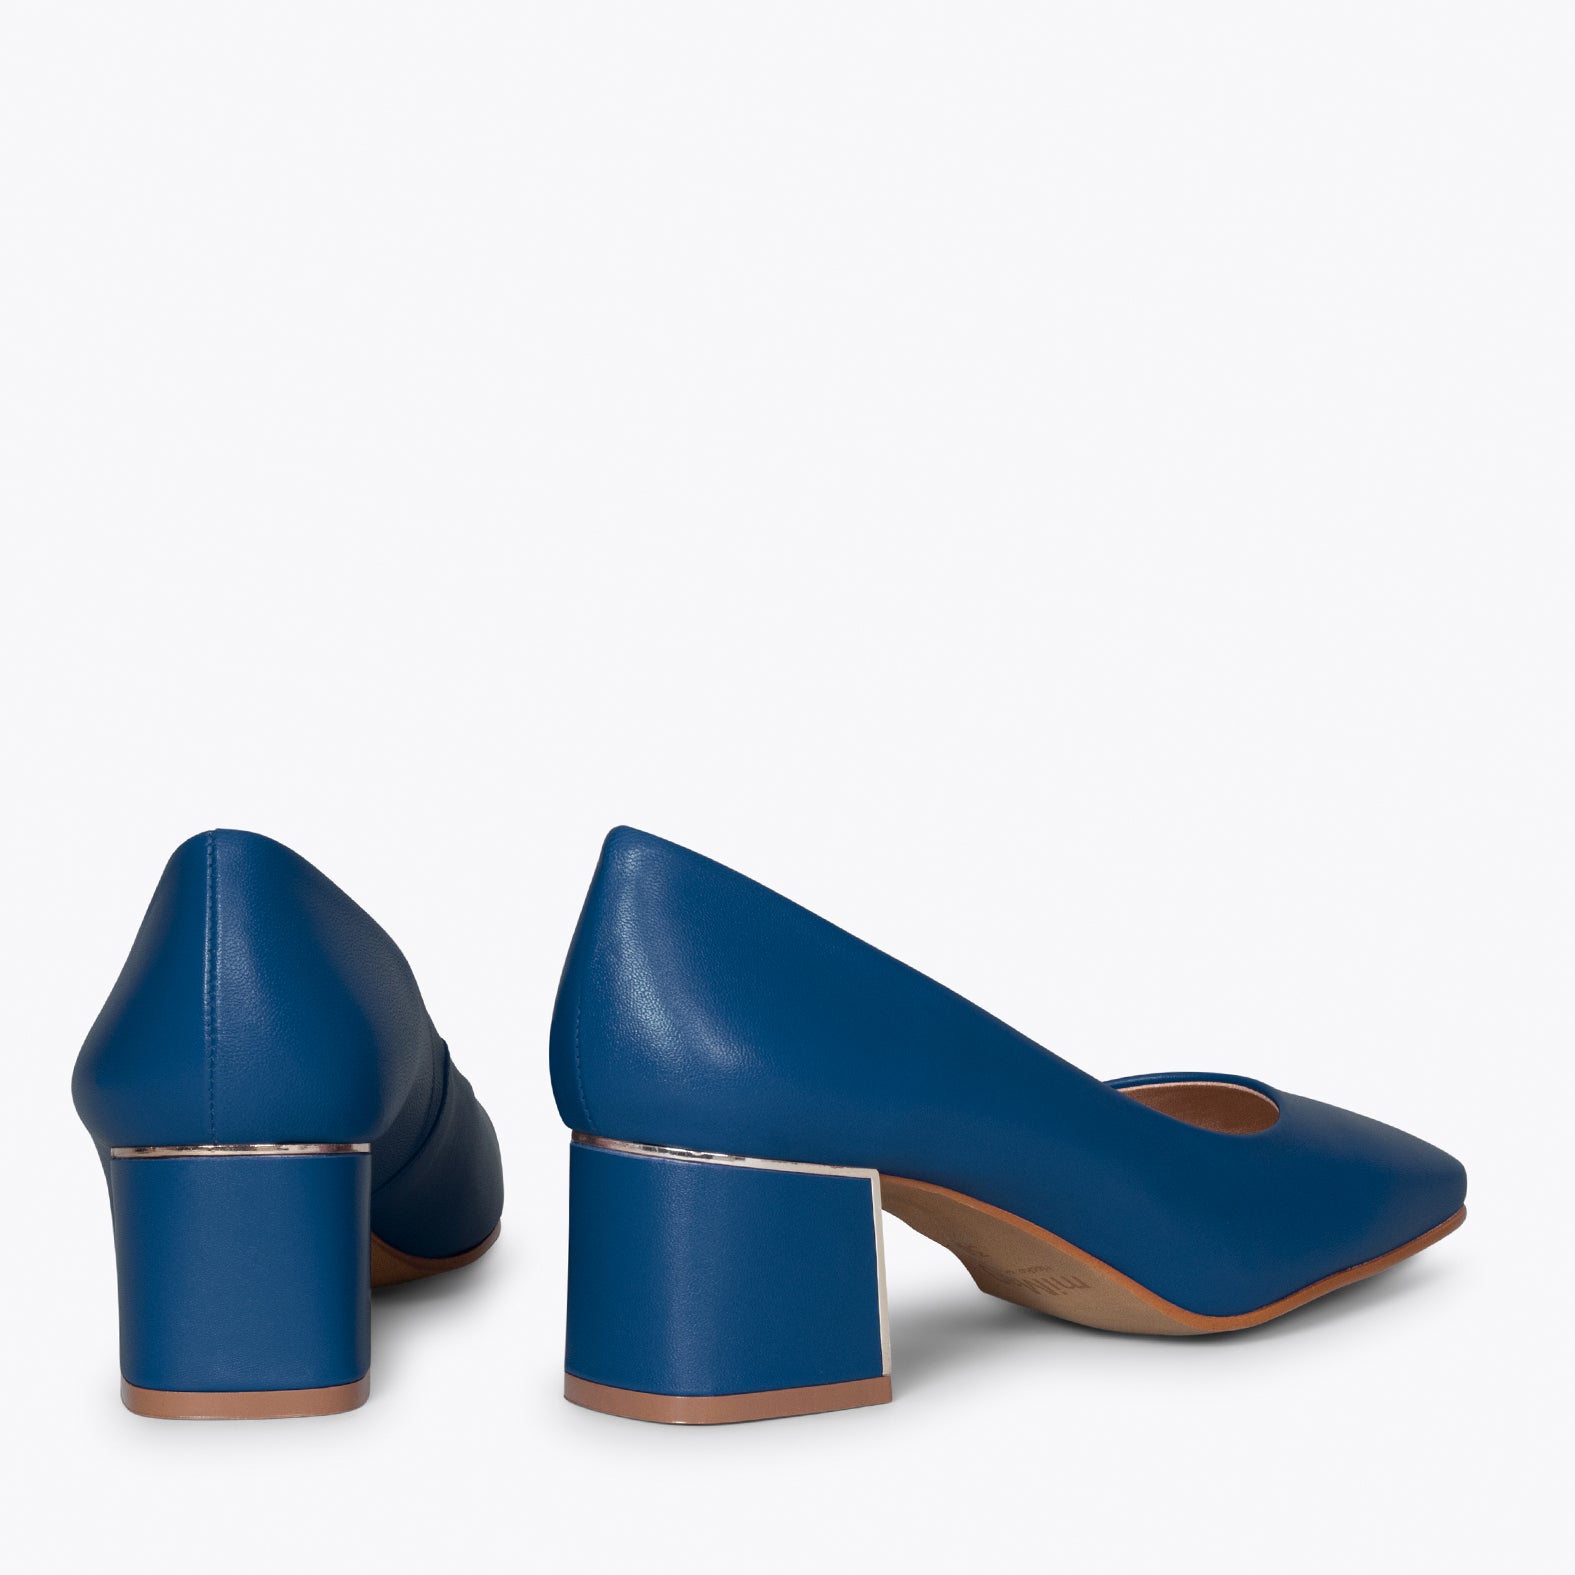 FEMME – NAVY mid heel shoes with square toe